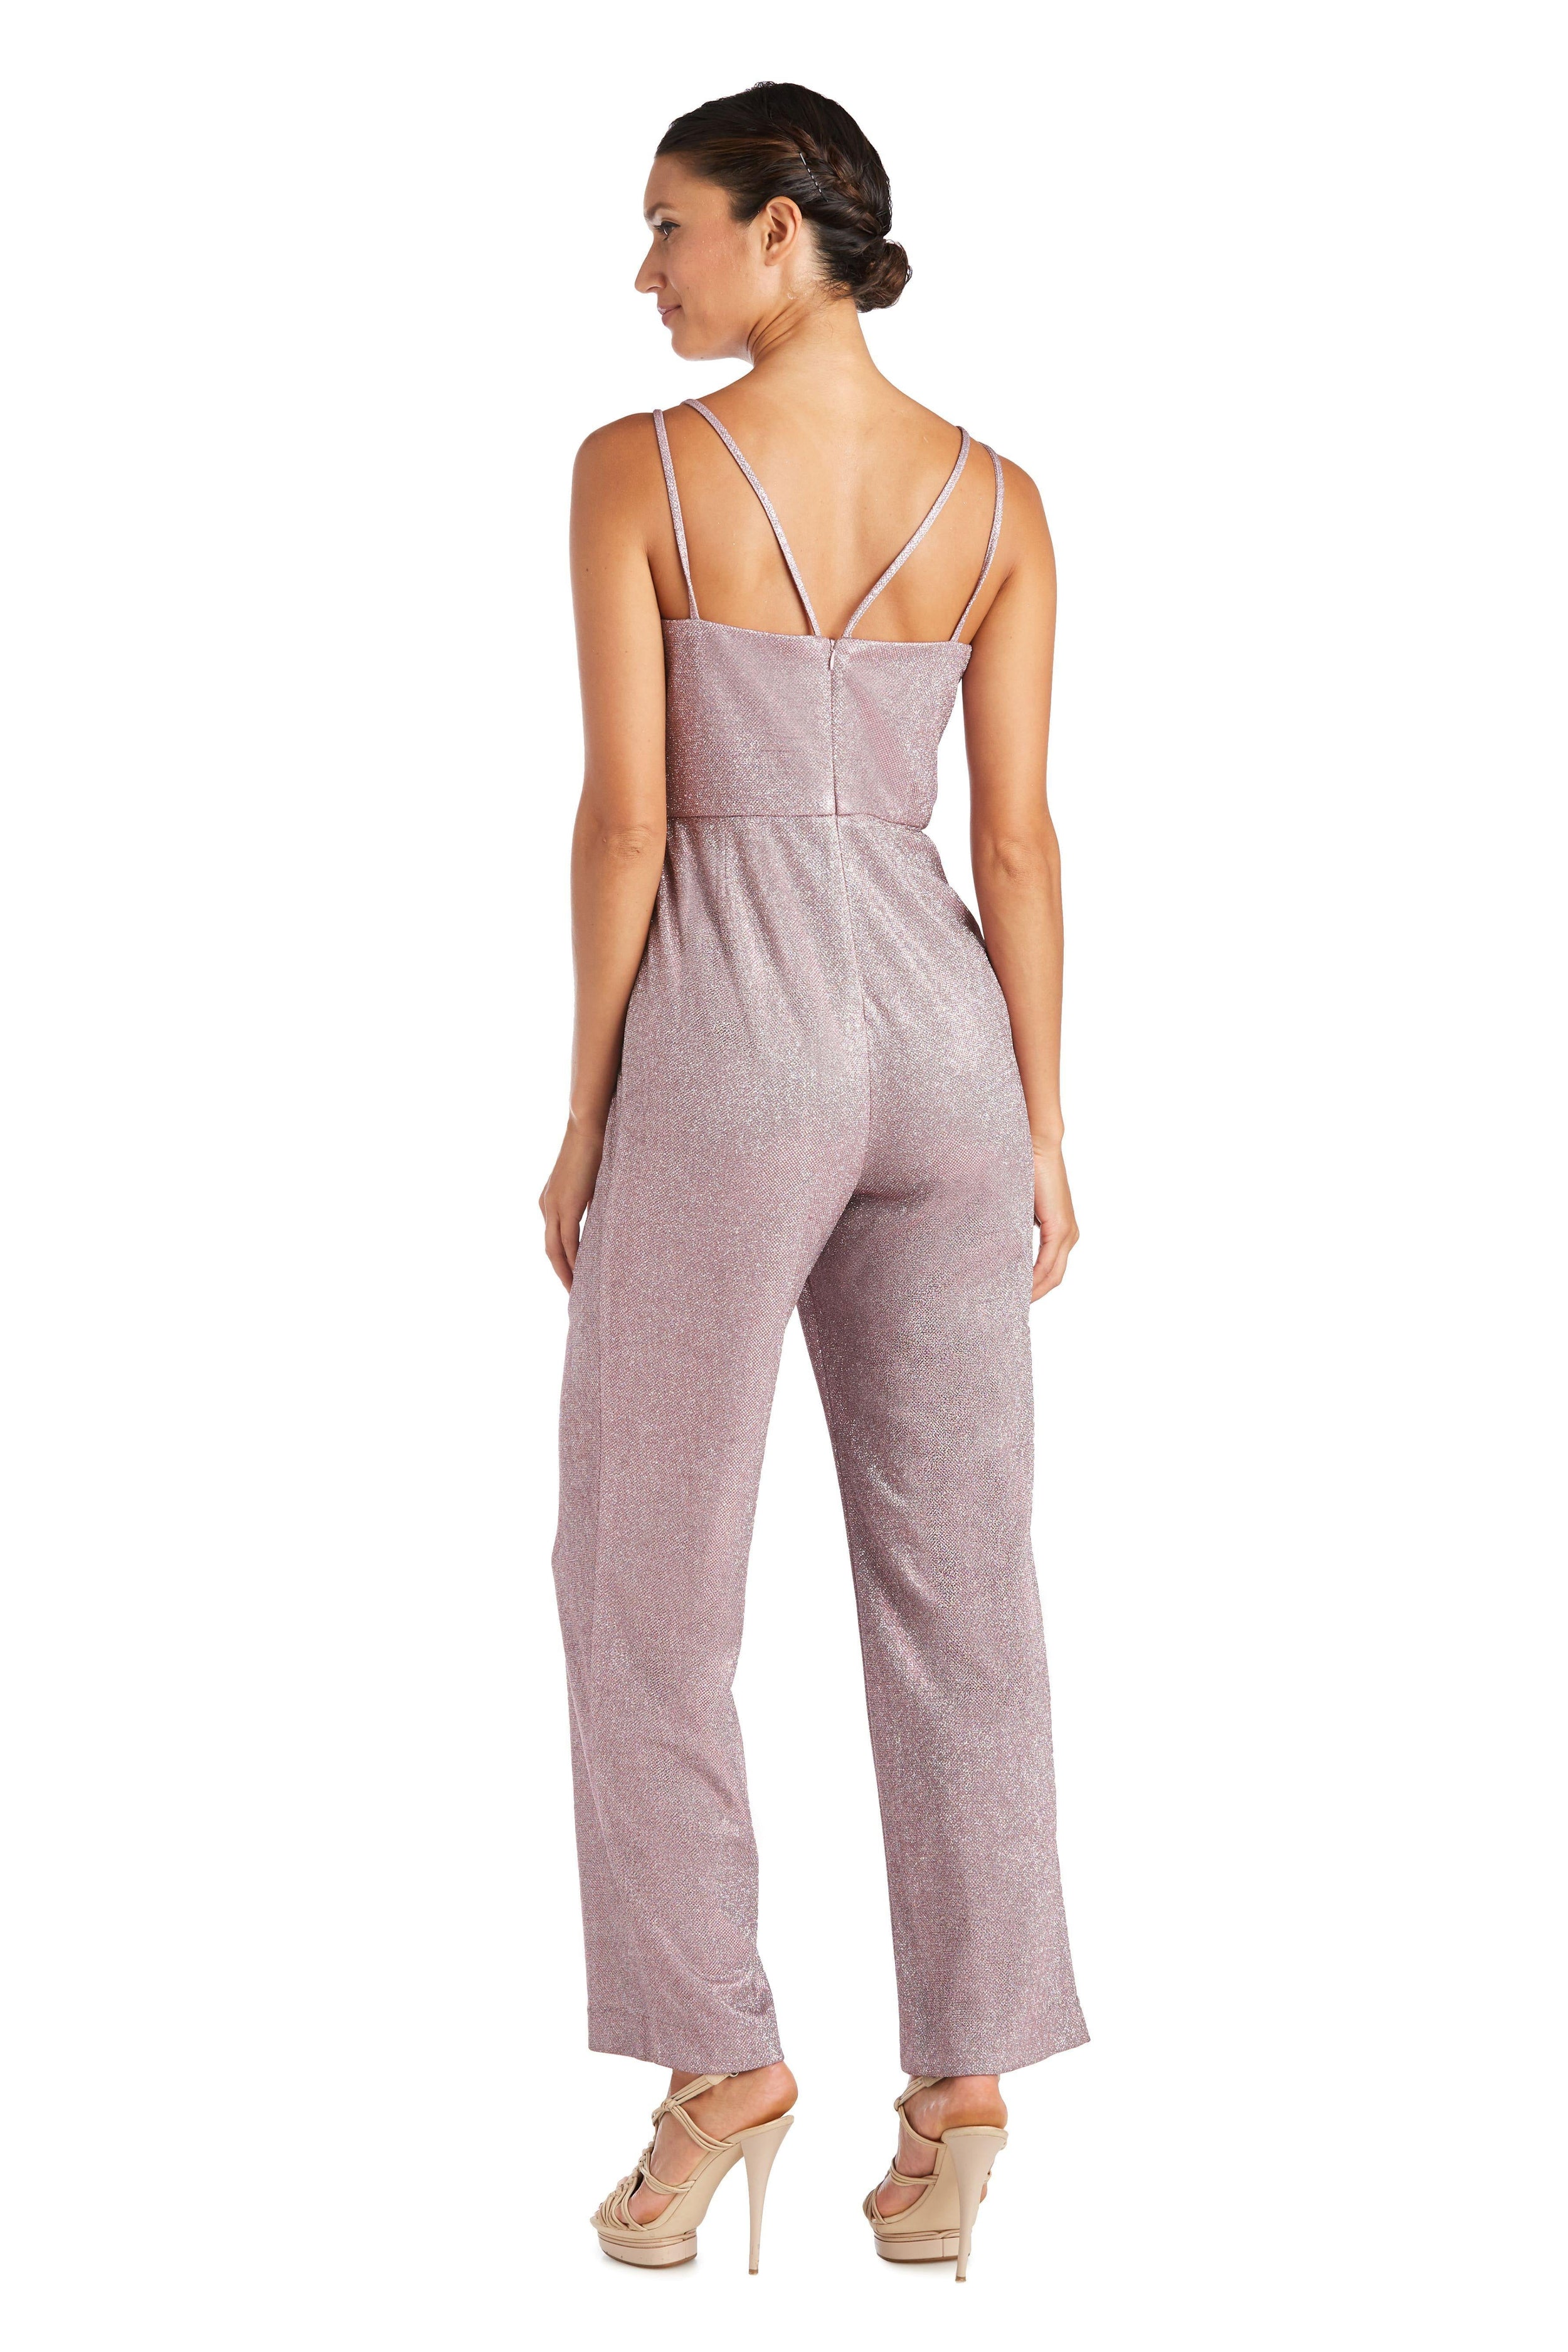 Nightway Long Formal Petite Jumpsuit 21950P - The Dress Outlet